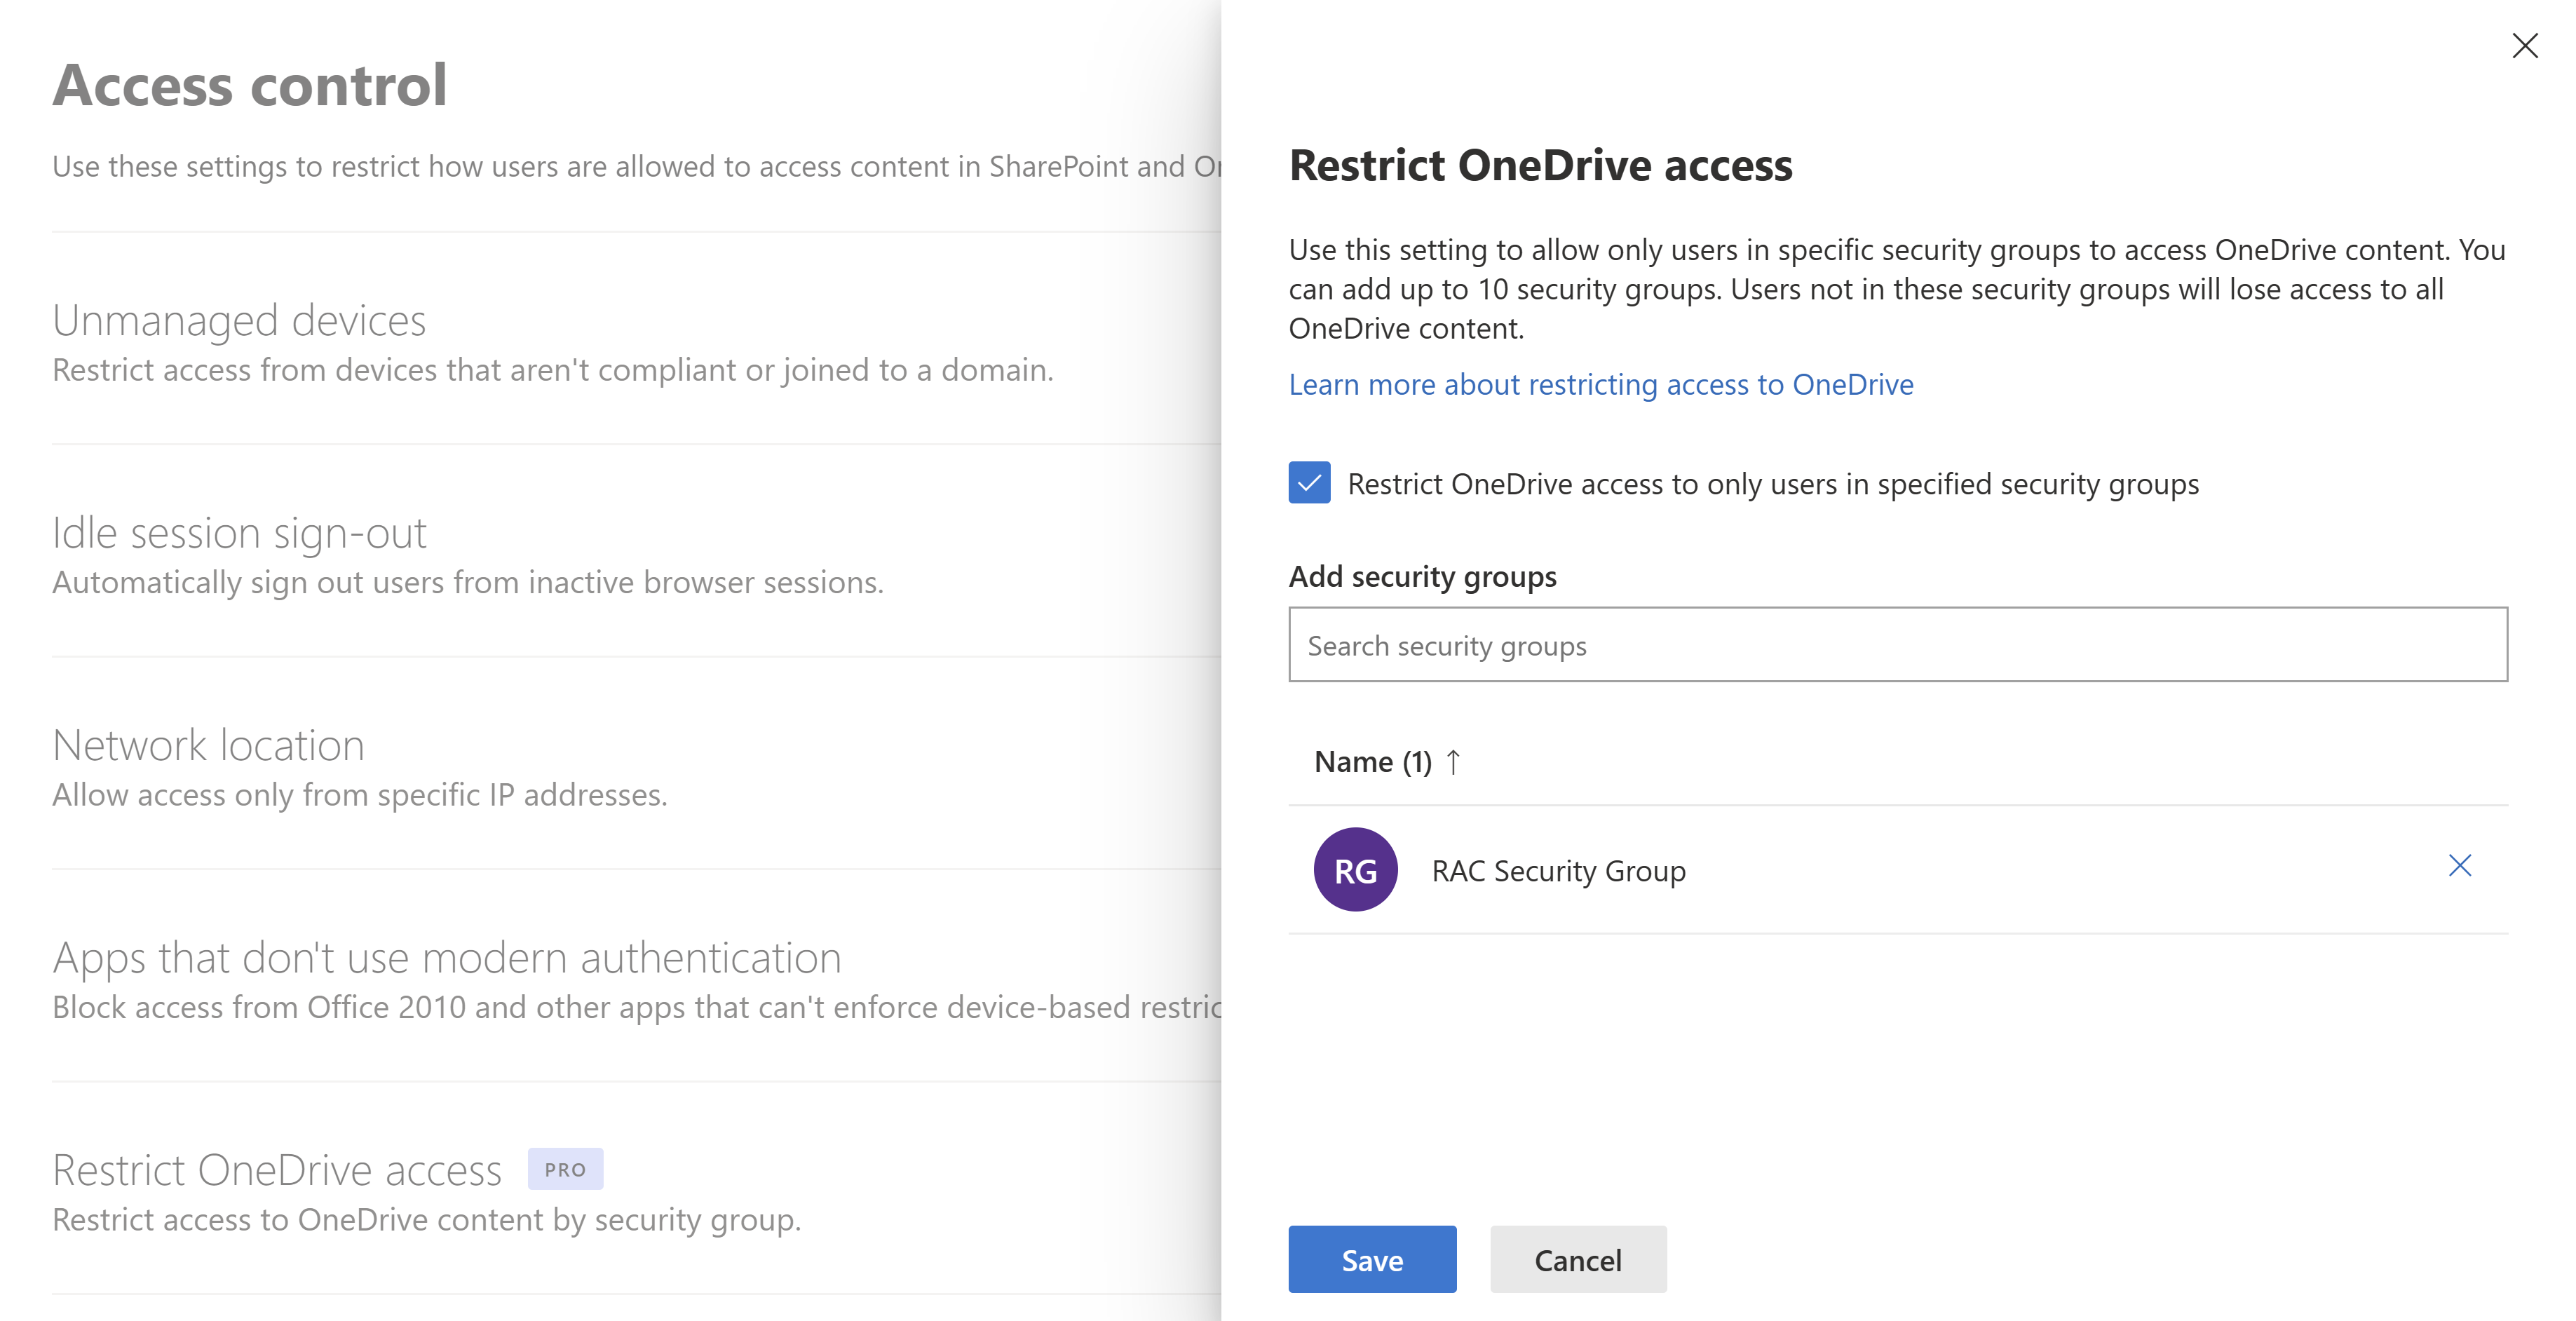 Restrict OneDrive access on the Access control page in the SharePoint admin center